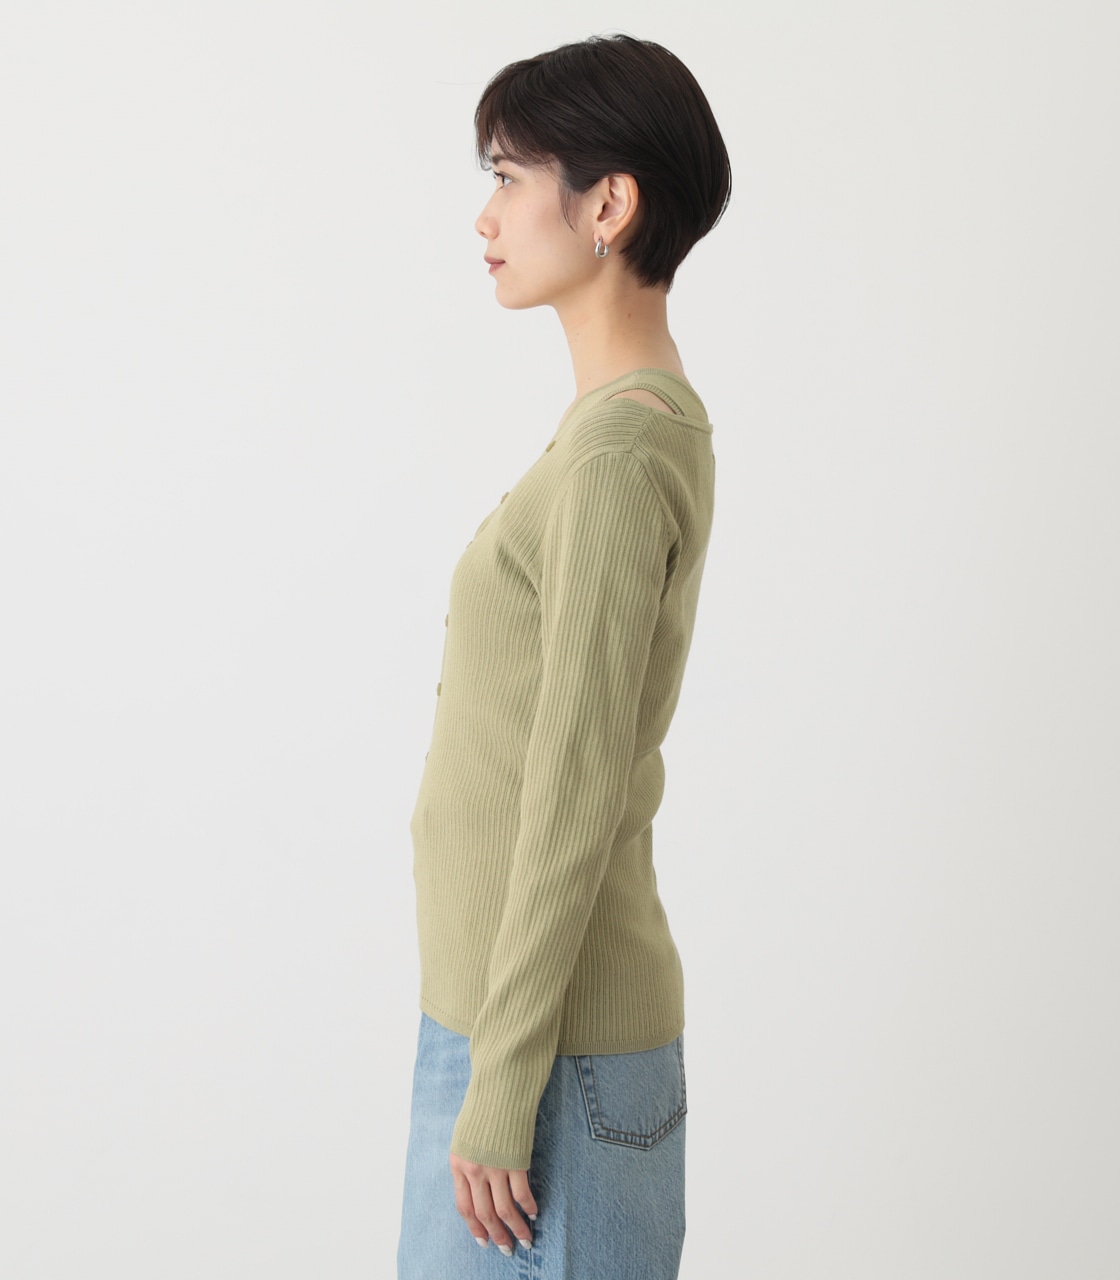 FAKE LAYERED BUTTON KNIT TOPS/フェイクレイヤードボタンニットトップス 詳細画像 LIME 6